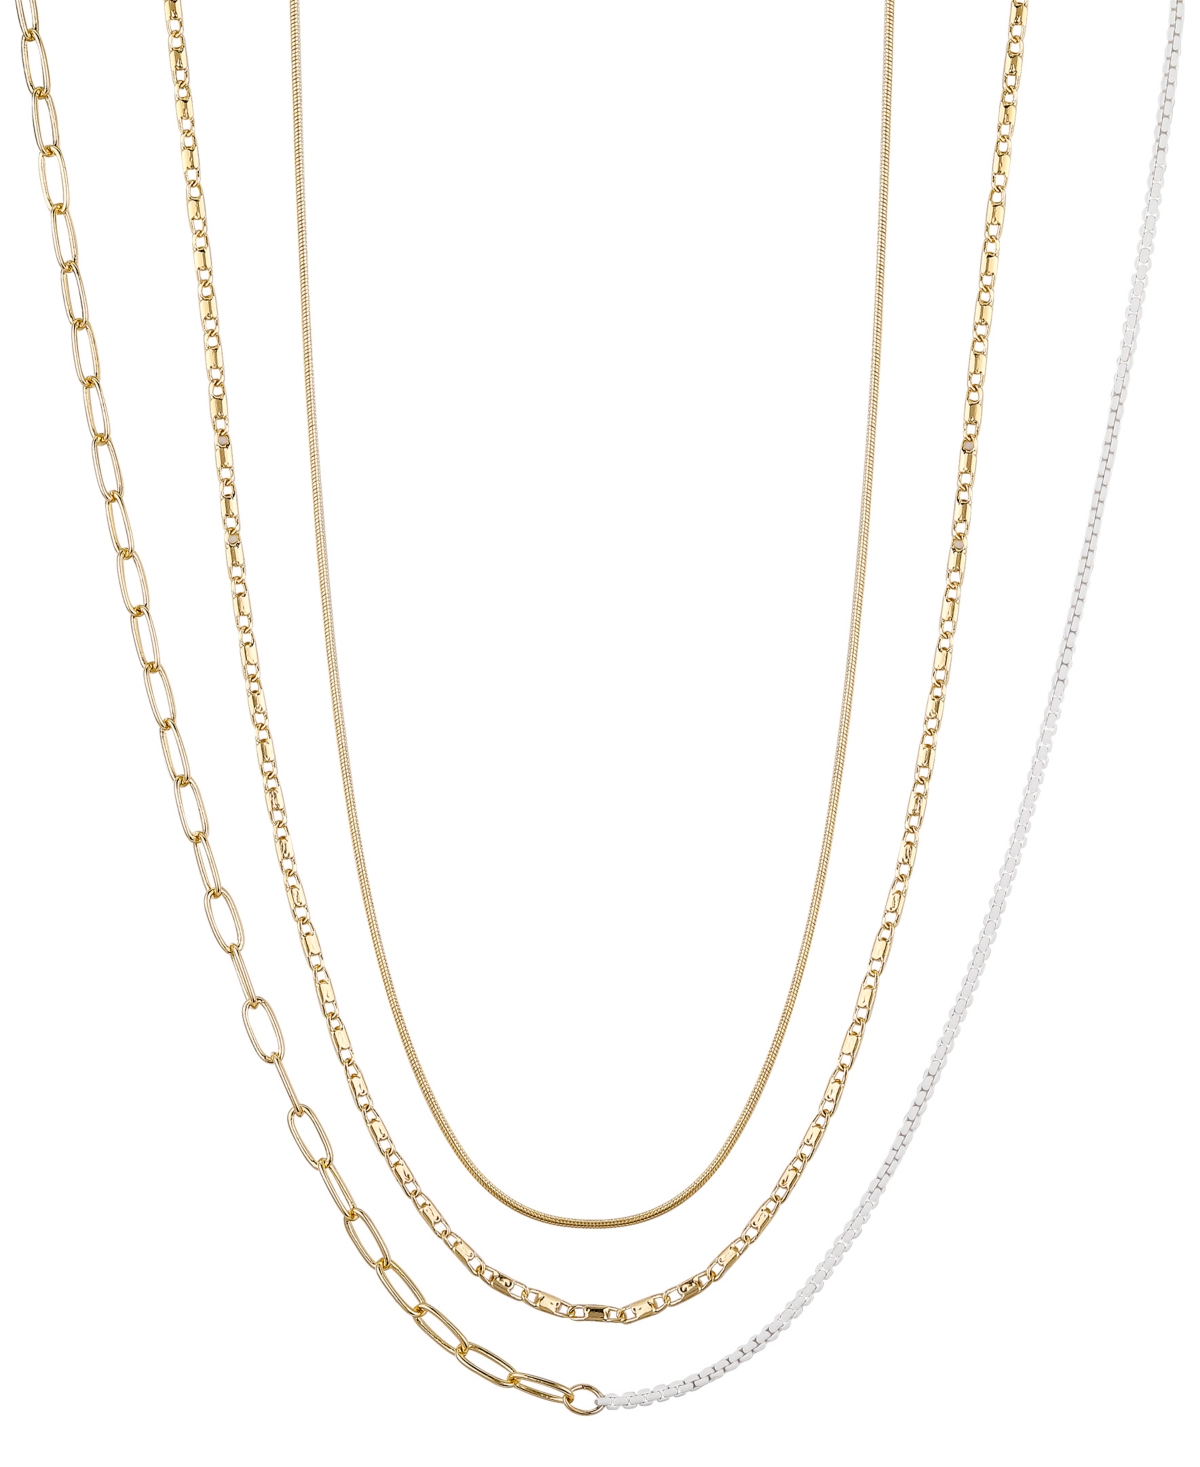 Unwritten 14k Gold Flash Plated White Enamel Paperclip Herringbone Chain Layered Necklaces, 3 Piece Set